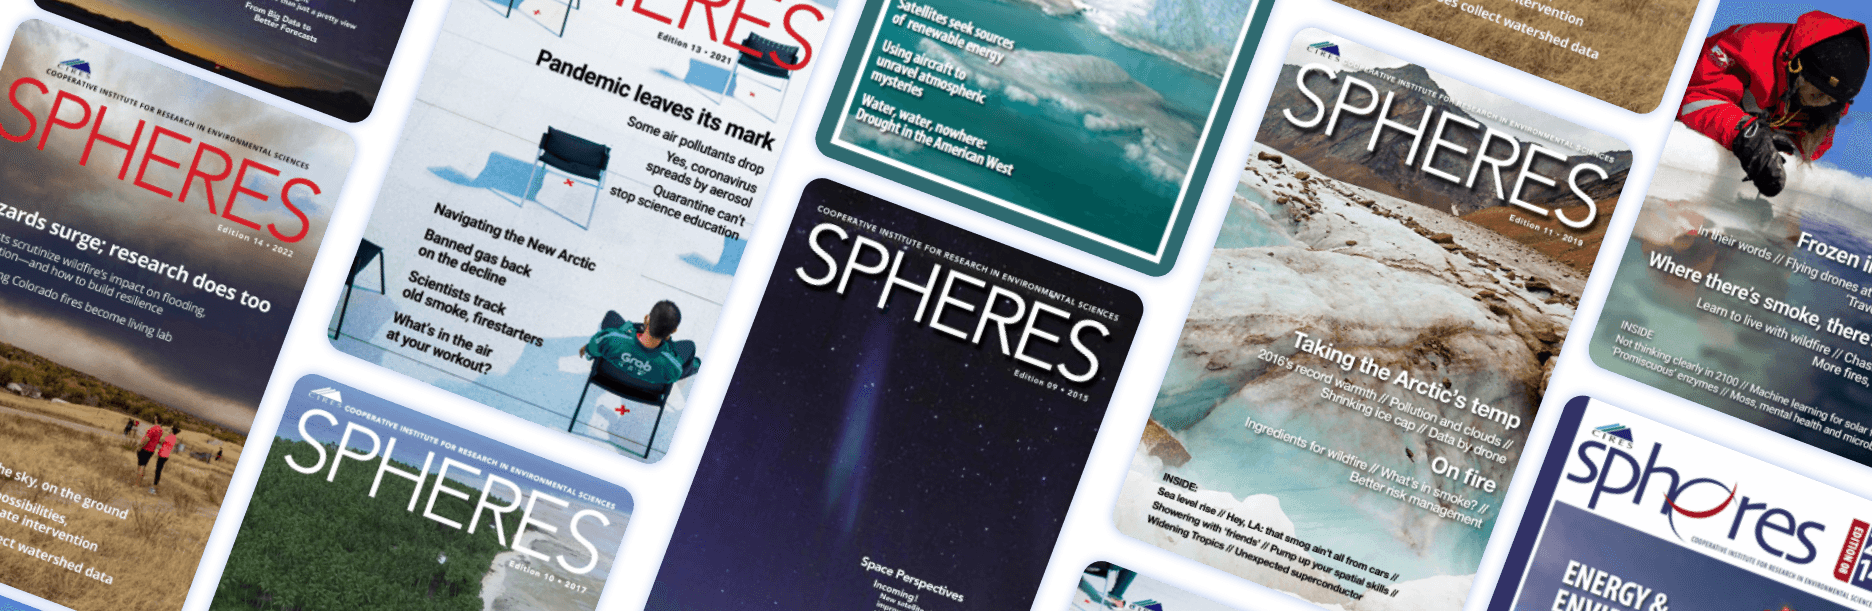 Spheres Magazine front pages cascading